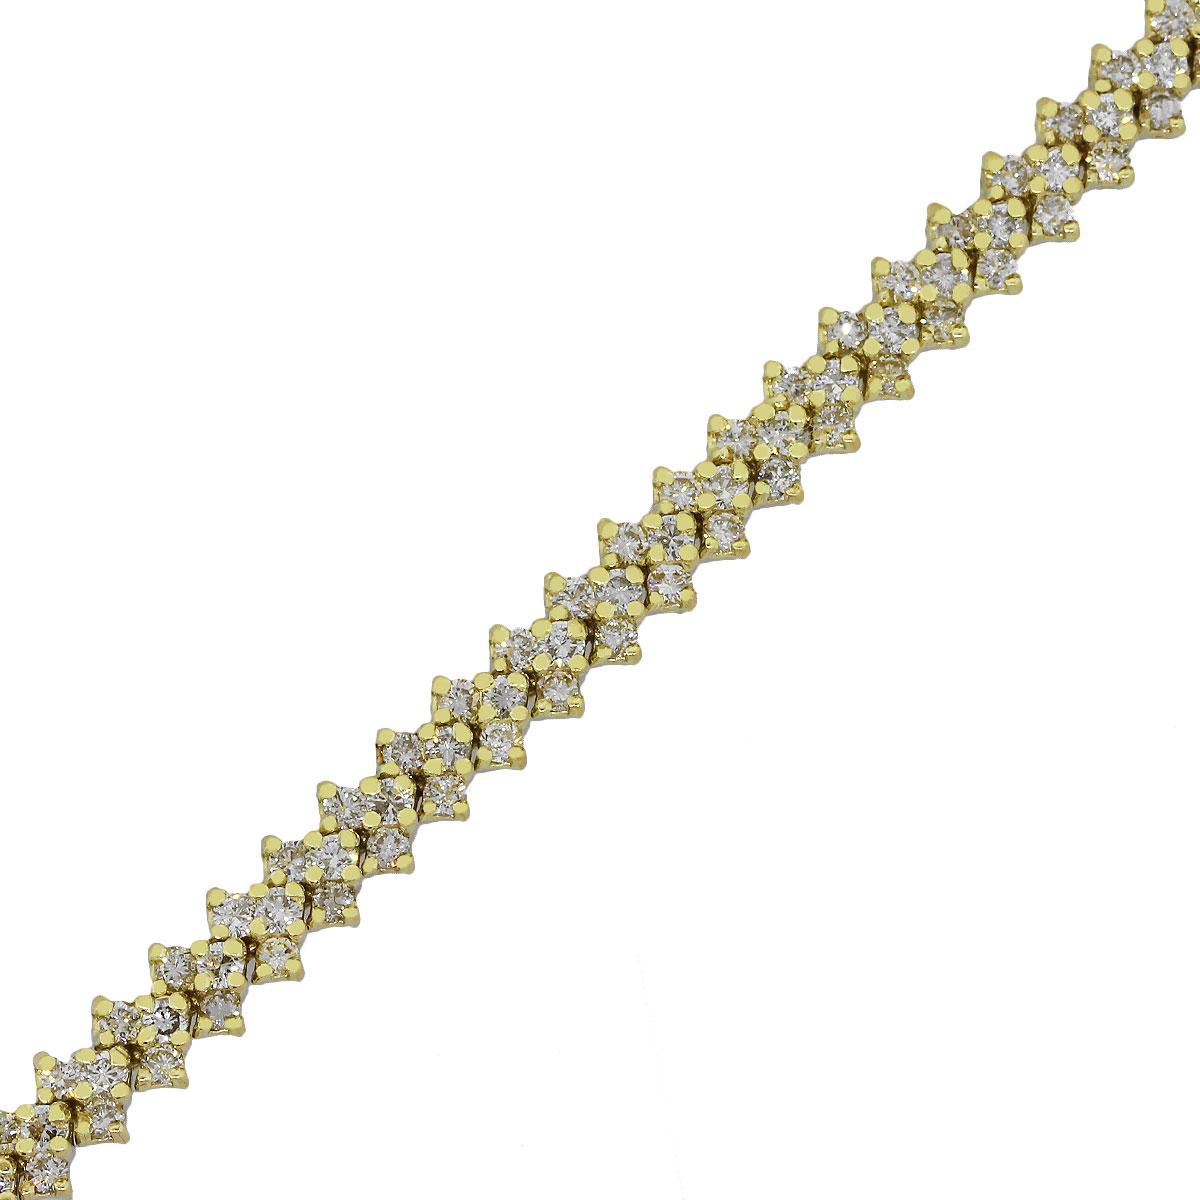 Material: 14k Yellow Gold
Diamond Details: Approximately 3ctw round brilliant diamonds. Diamonds are H/I in color and VS-SI in clarity.
Clasp: Tongue in box with safety latch
Measurements: 7” x 0.20” x 0.15”
Total Weight: 16g (10.2dwt)
SKU: G8560